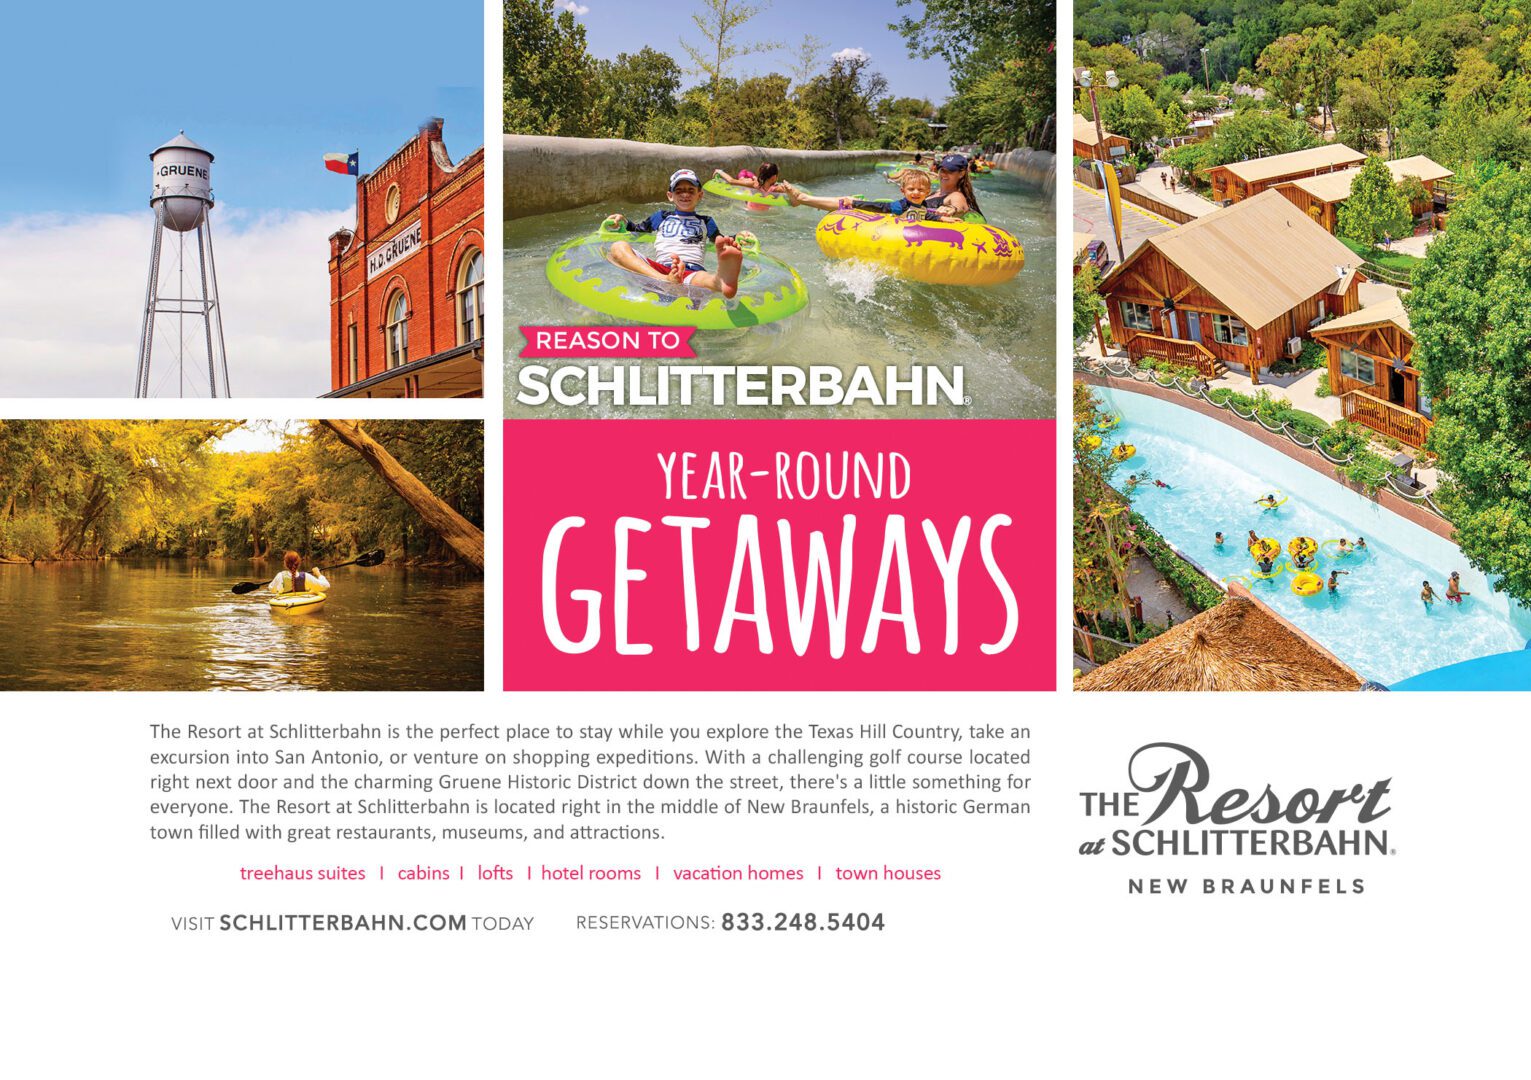 A brochure for the rose of schuttrabin resort.